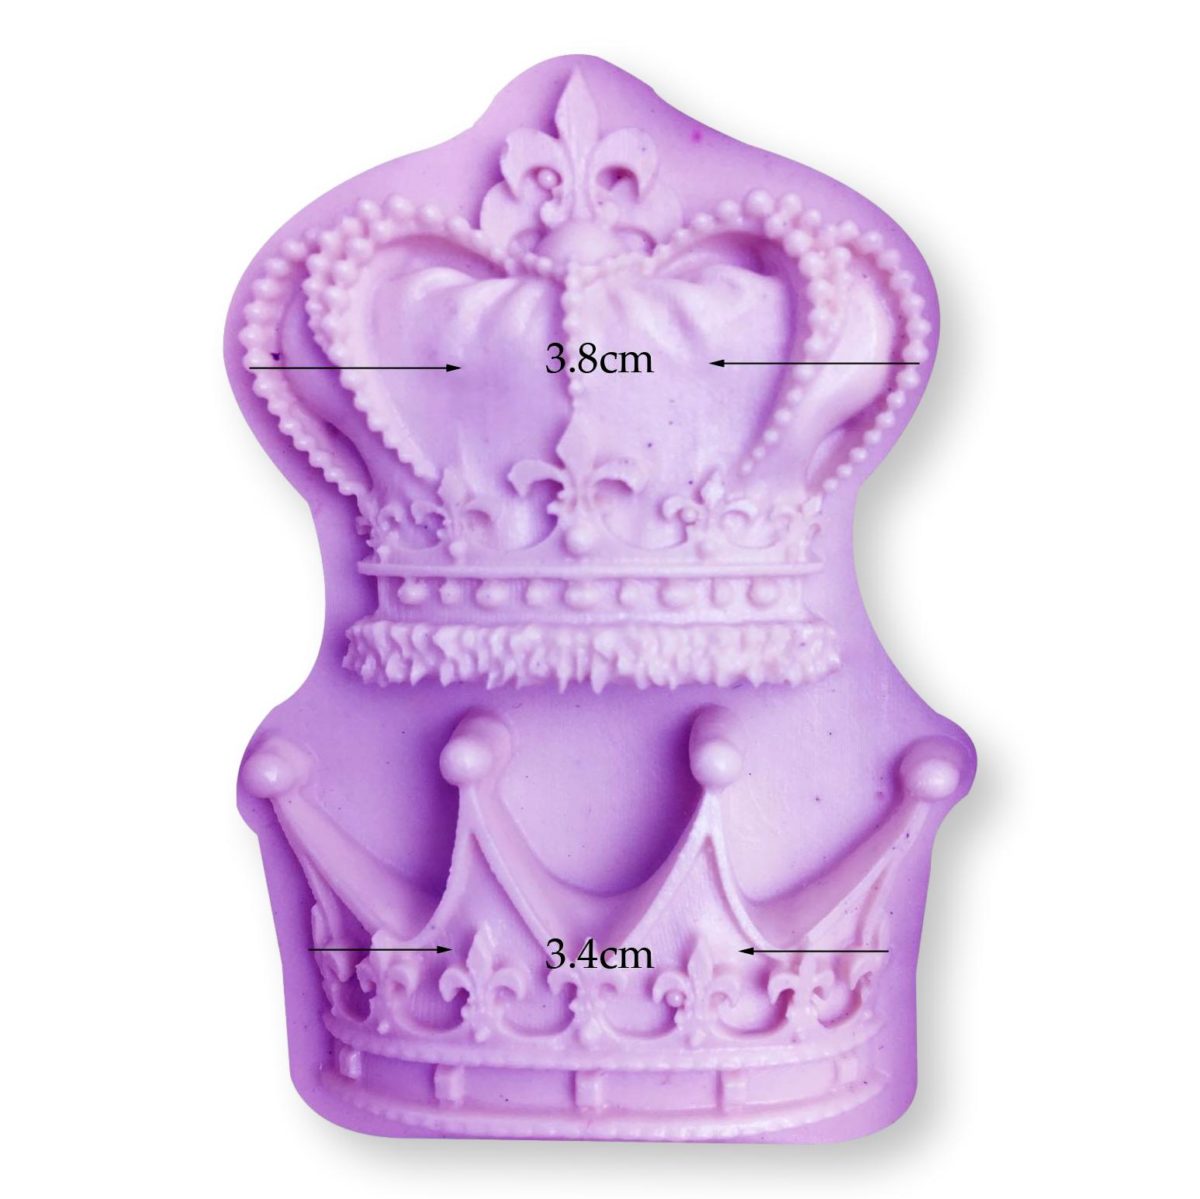 Royal-Crown-Silicone-Mold-_clipped_rev_1-1200×1199 (1)